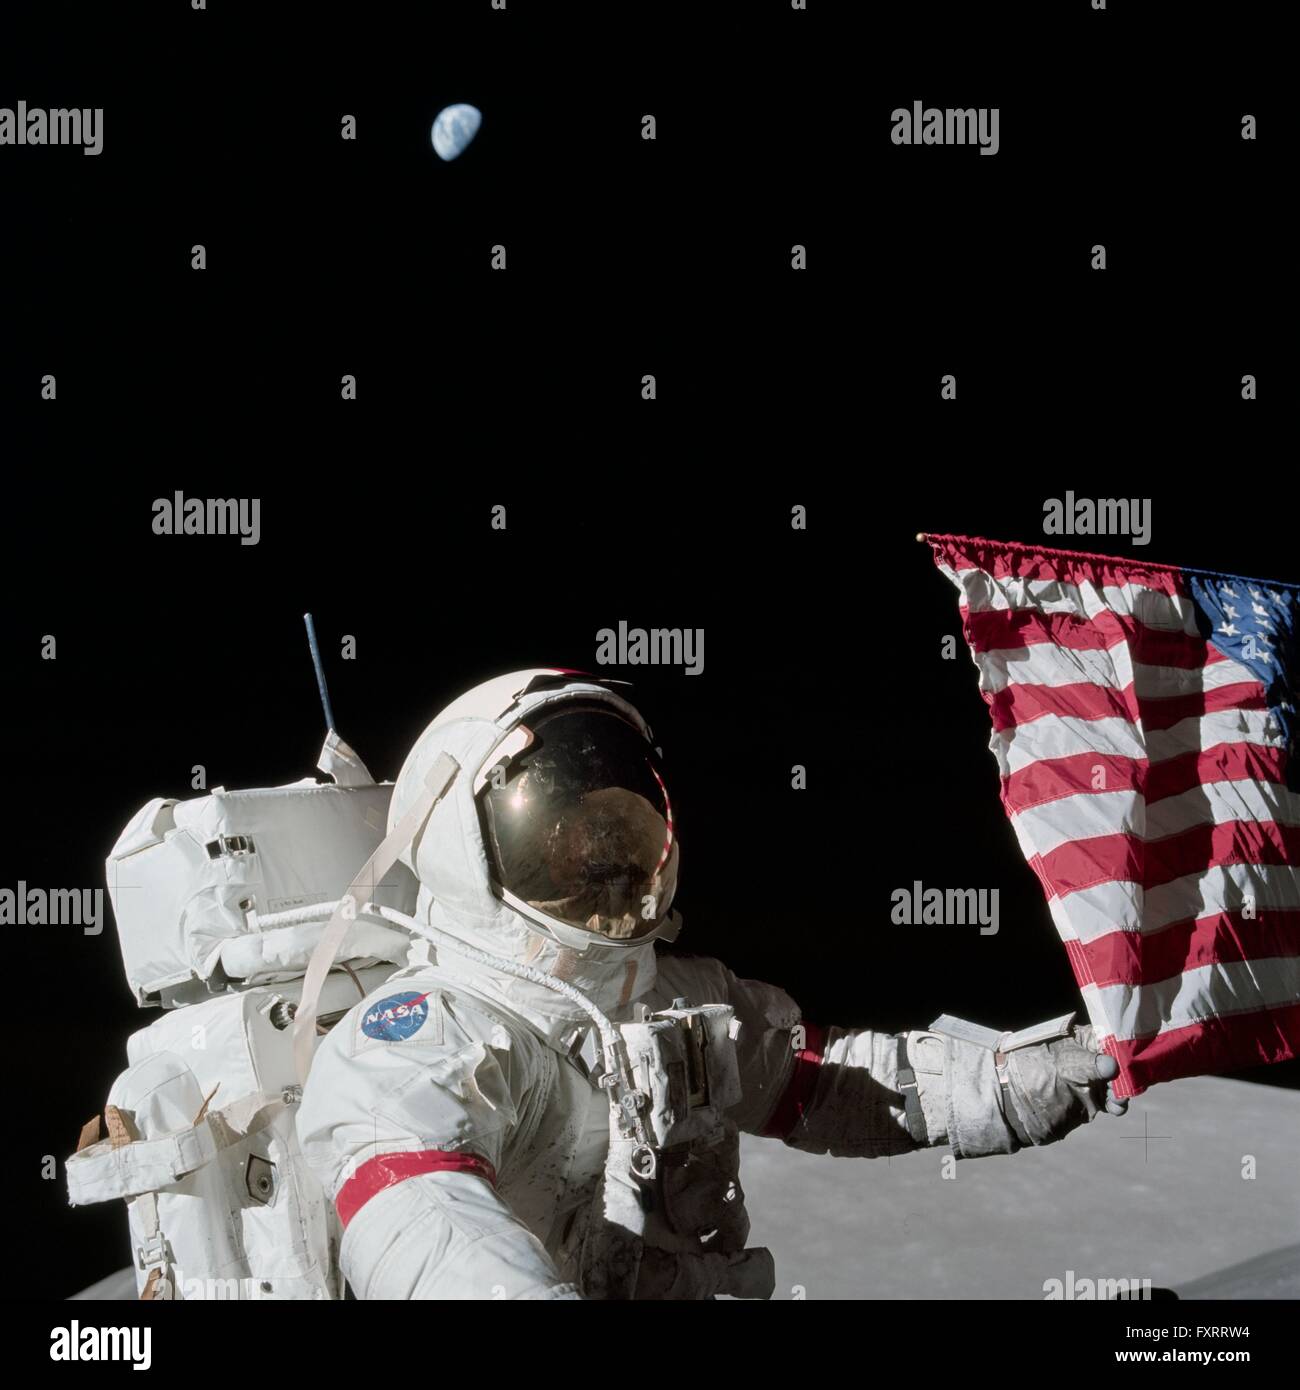 NASA astronaut and Apollo 17 commander Eugene A. Cernan is holding the lower corner of the American flag during the first EVA on the lunar surface December 12, 1972. Apollo 17 is the final lunar landing mission scheduled. Stock Photo